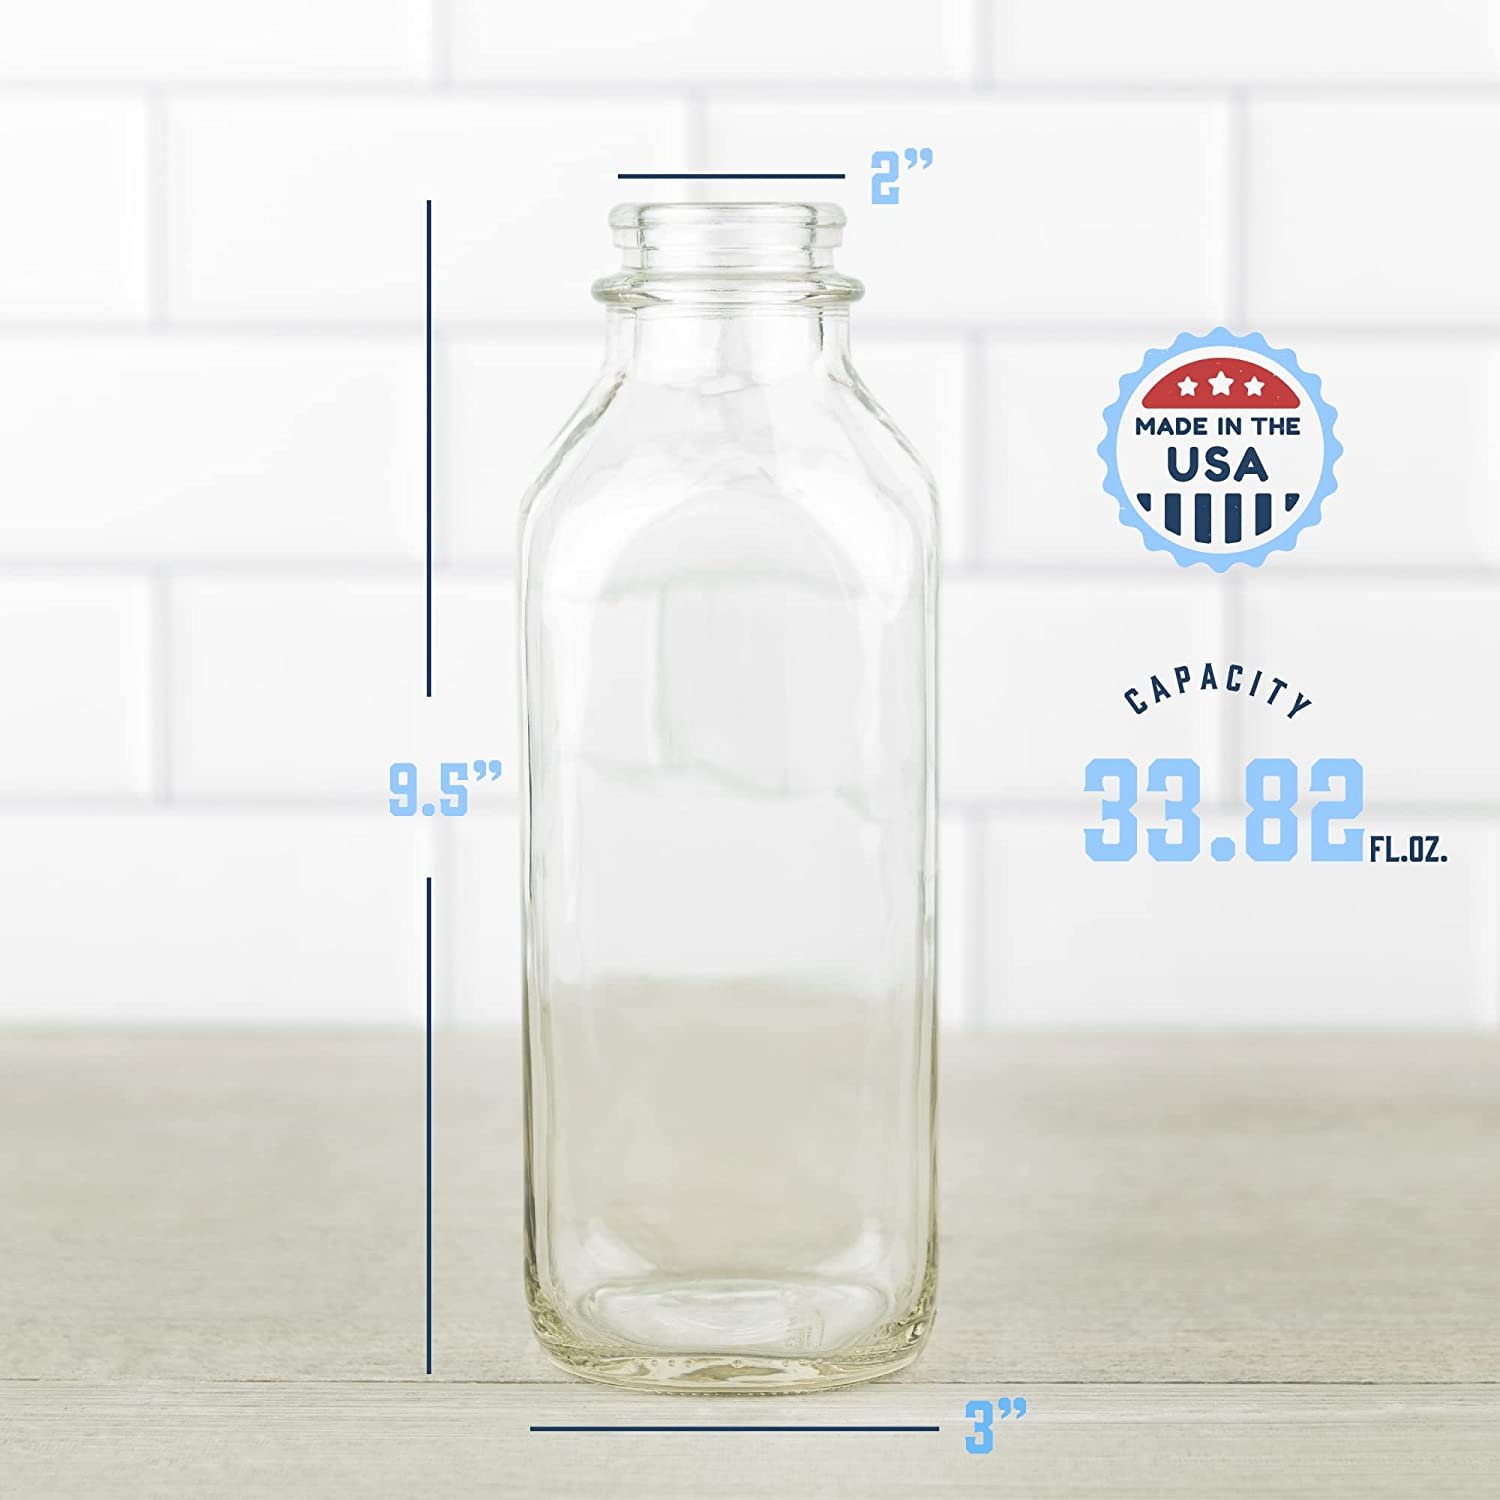 Kitchentoolz 33 Oz Square Glass Milk Jugs with Caps - Perfect Milk Container